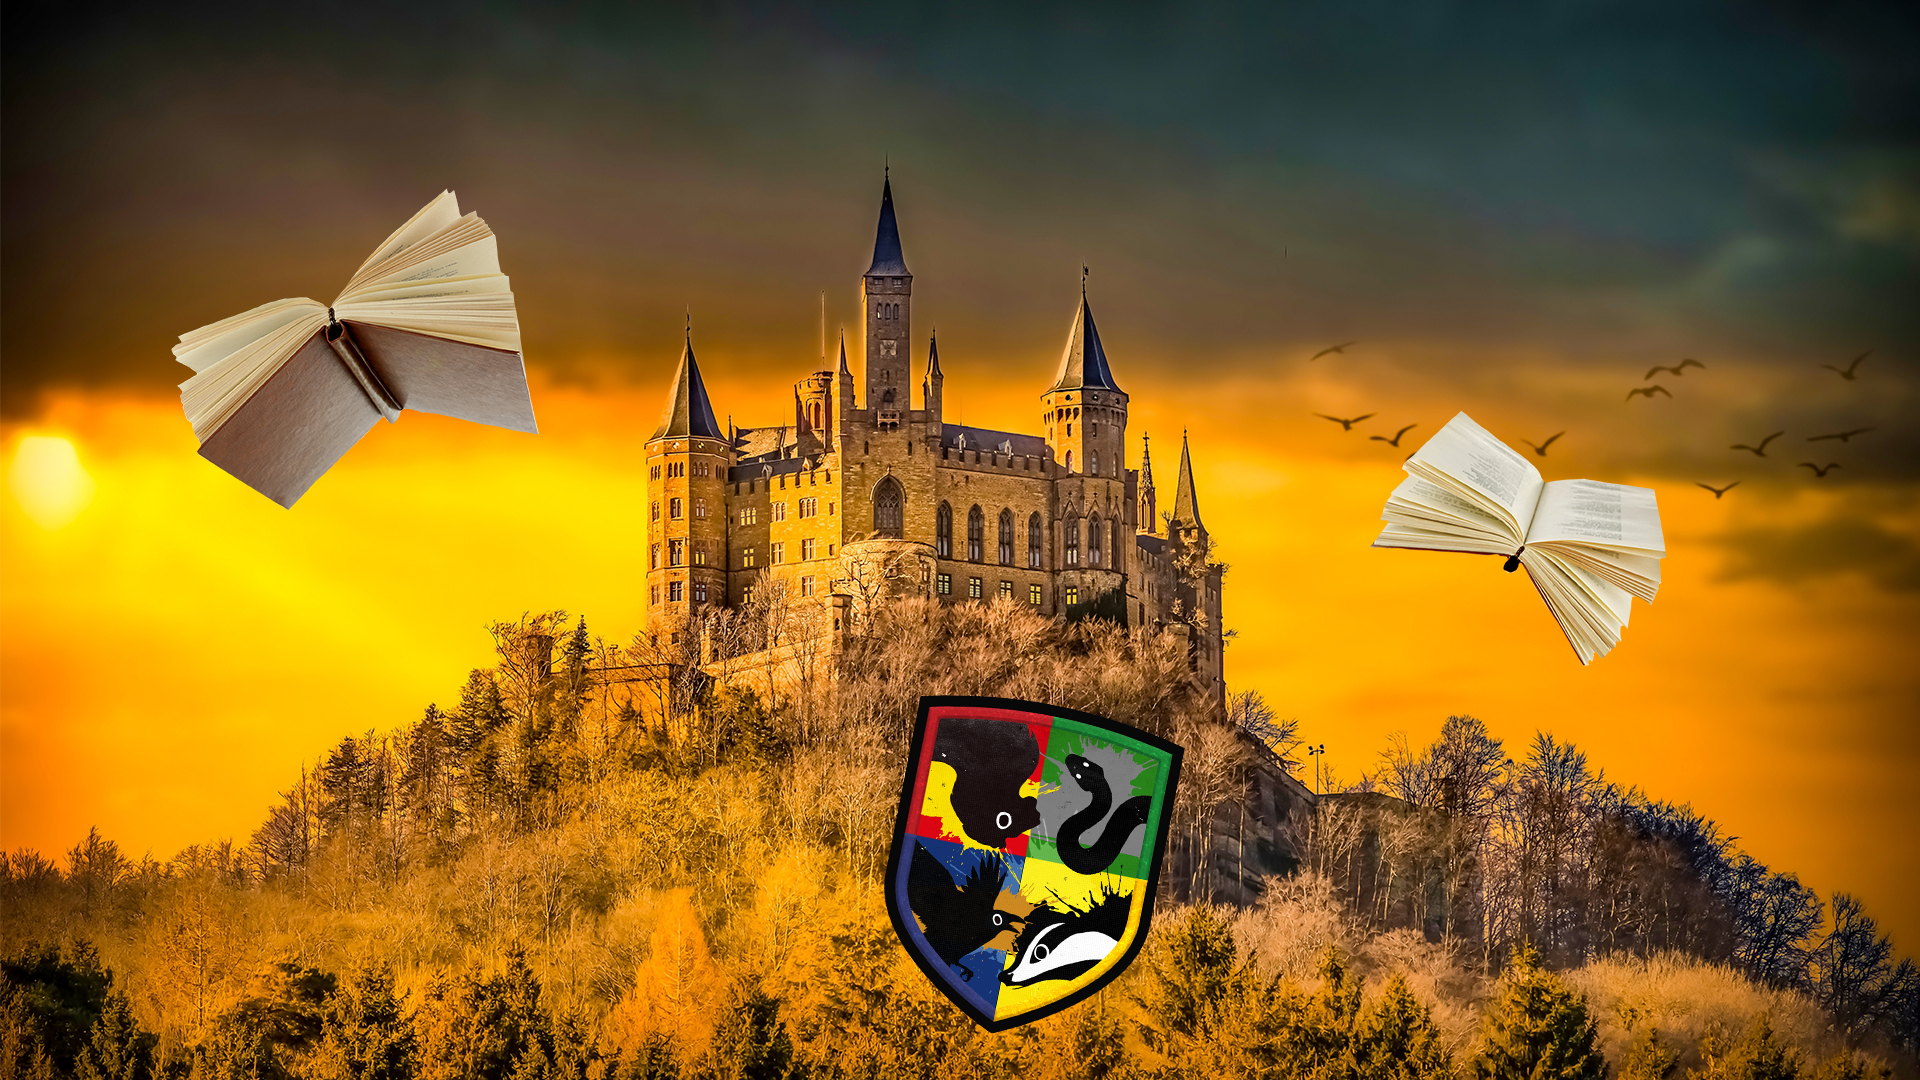 Hogwarts surrounded by flying books and a shield featuring the four houses